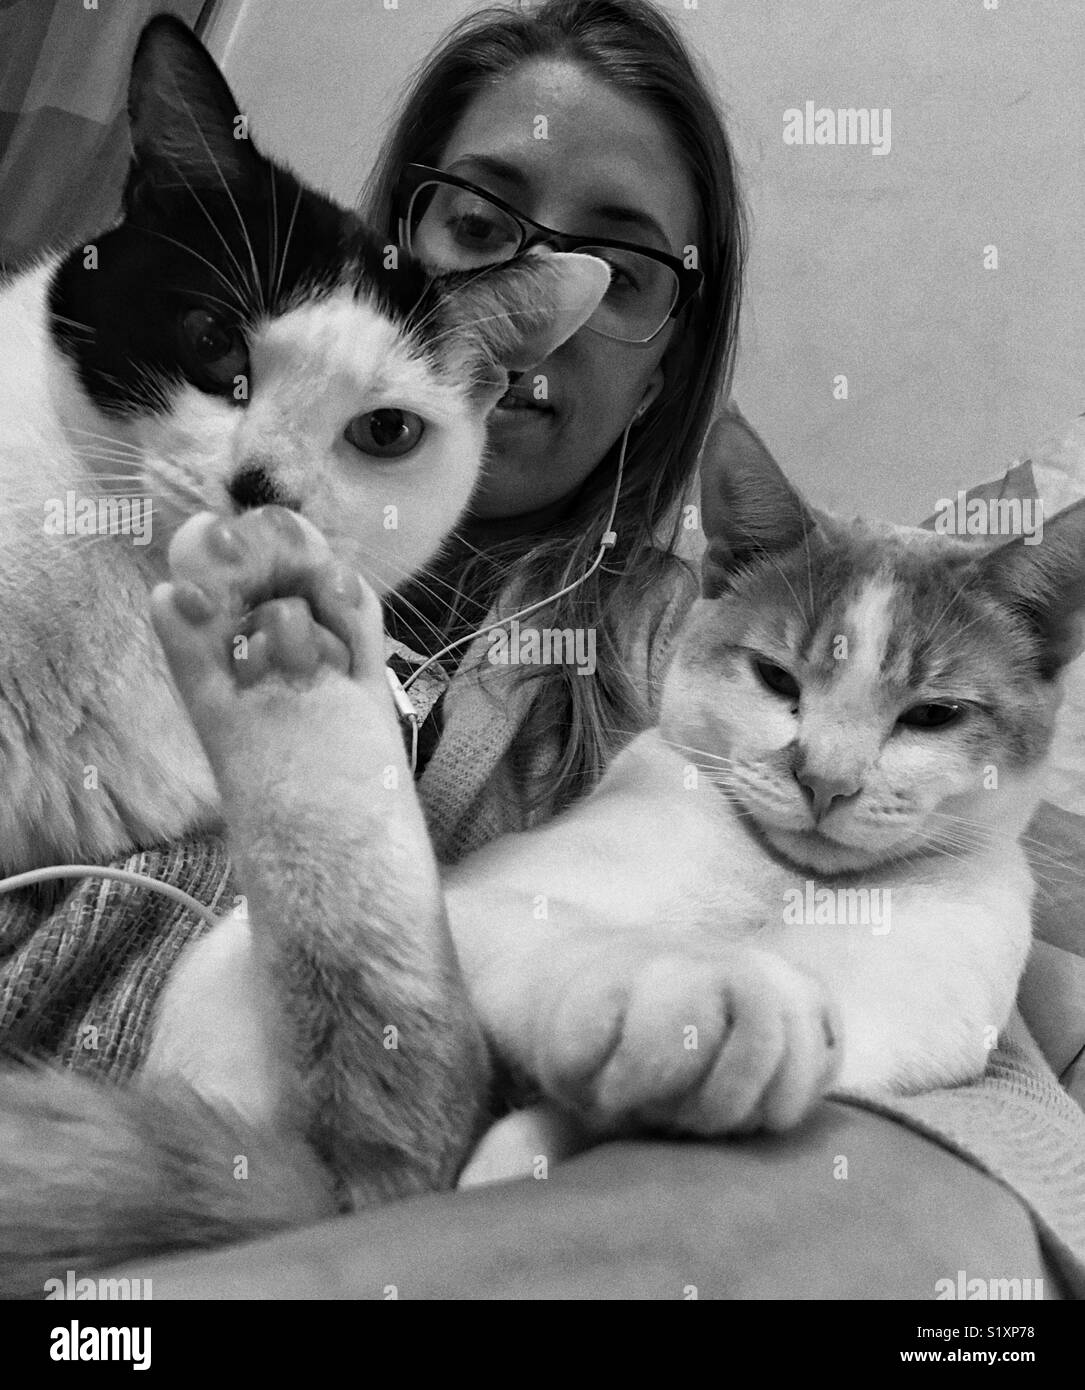 A black and white photograph of a woman sitting holding two cats while she listens to music on a Saturday evening Stock Photo